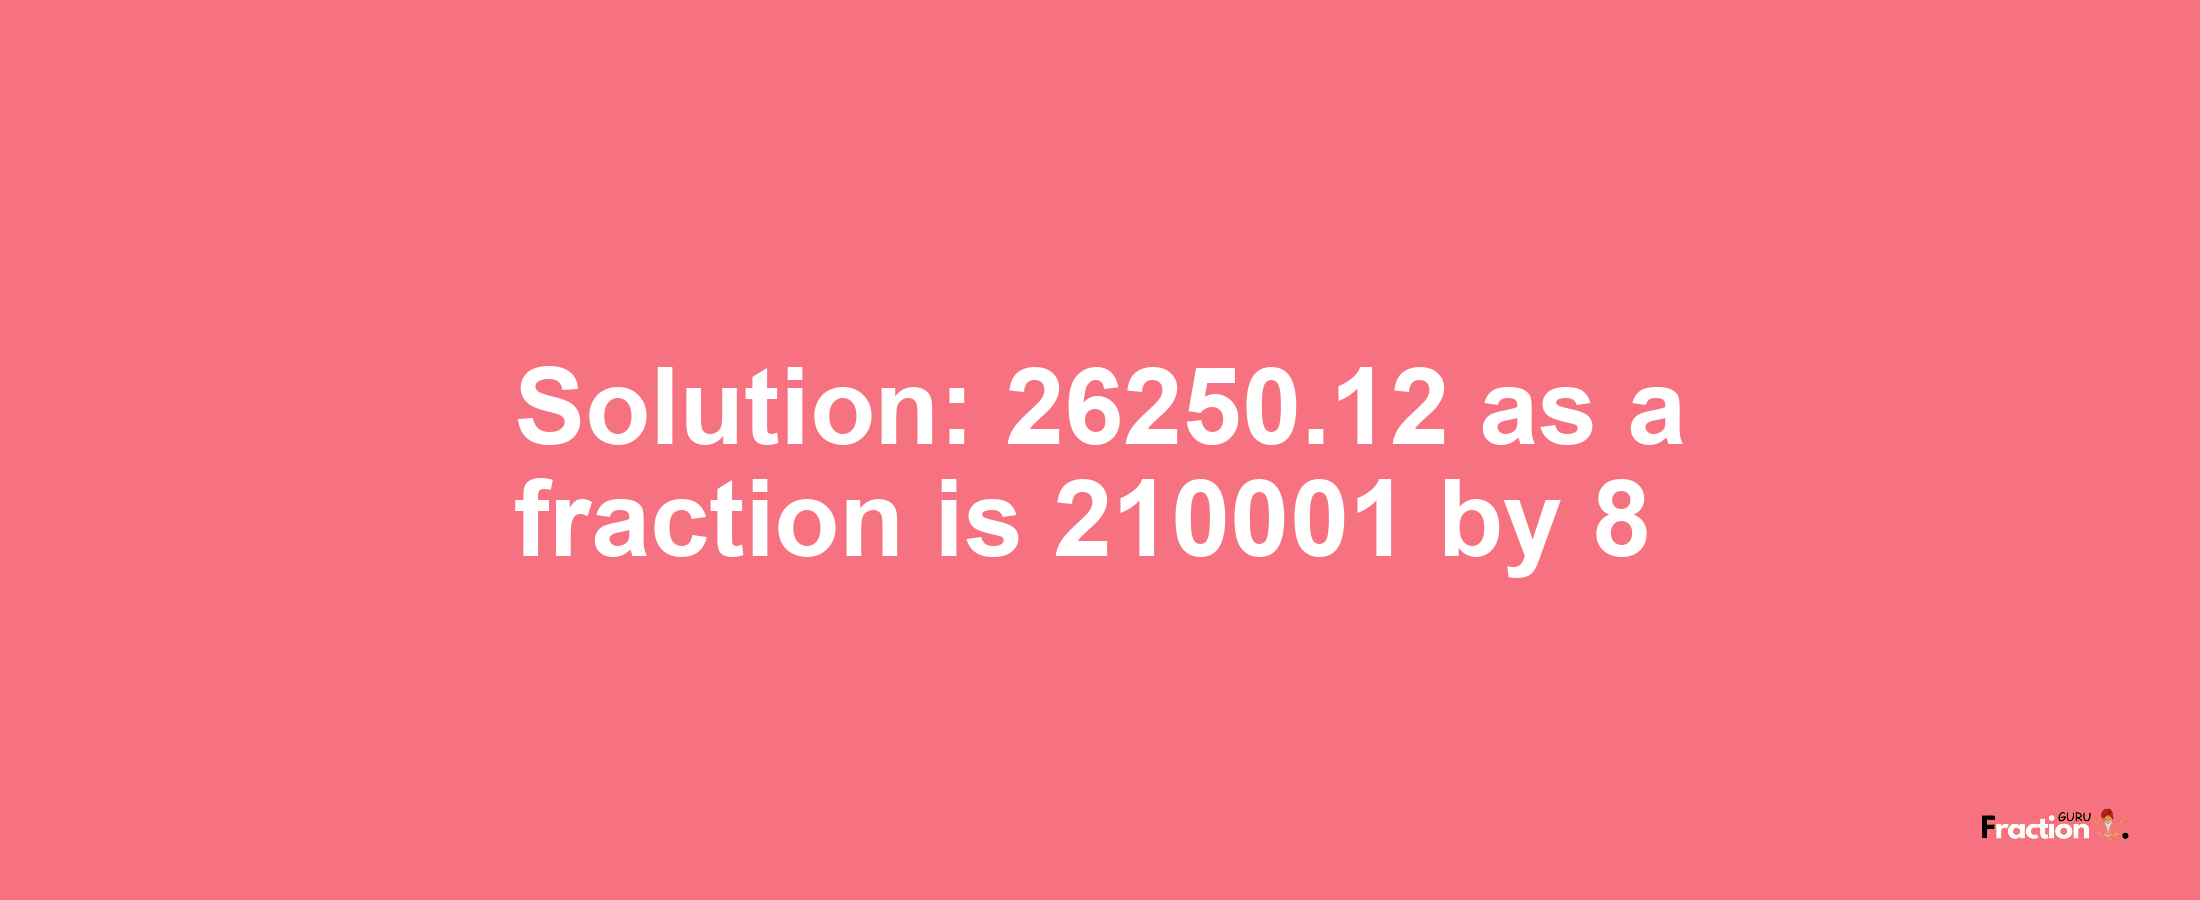 Solution:26250.12 as a fraction is 210001/8